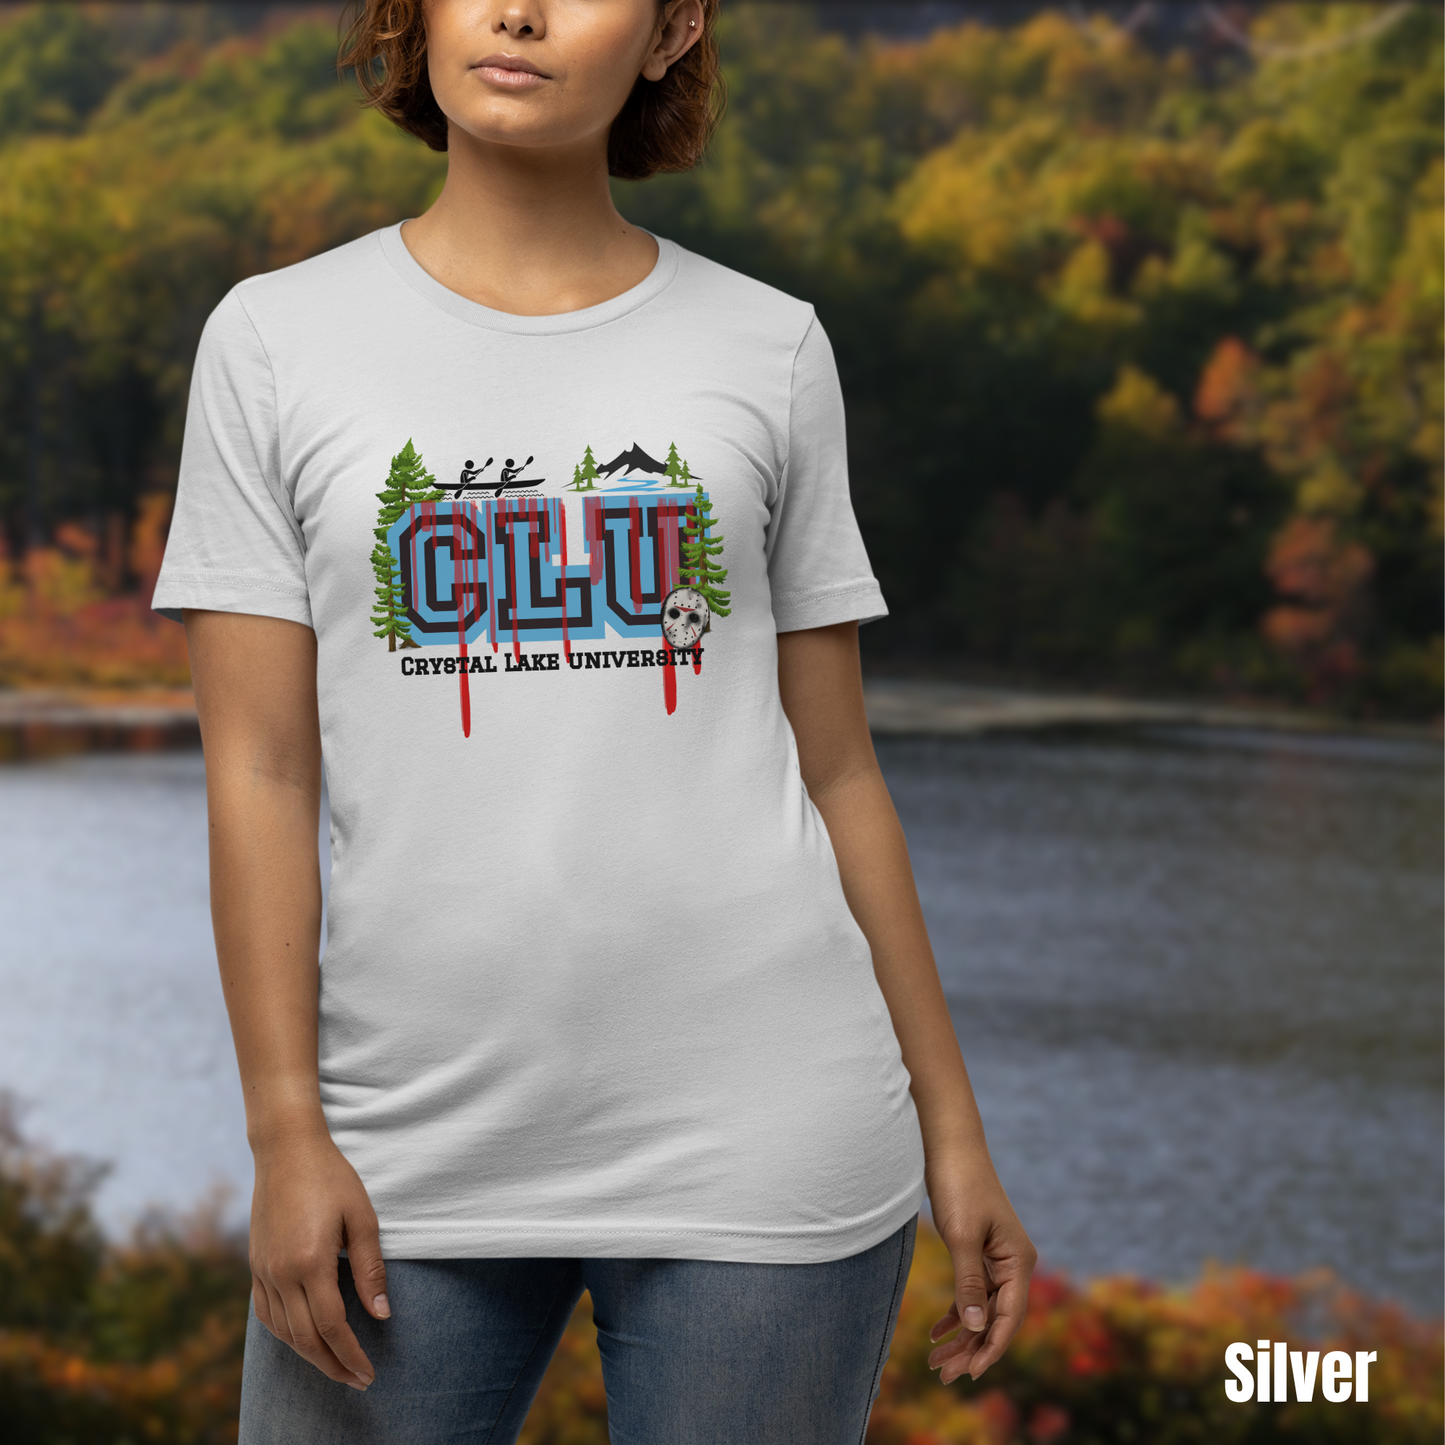 Crystal Lake University tee unisex horror tshirt for her camp crystal lake tee gift Friday the 13th tee for her horror graphic tee Jason Voorhees horror tshirt